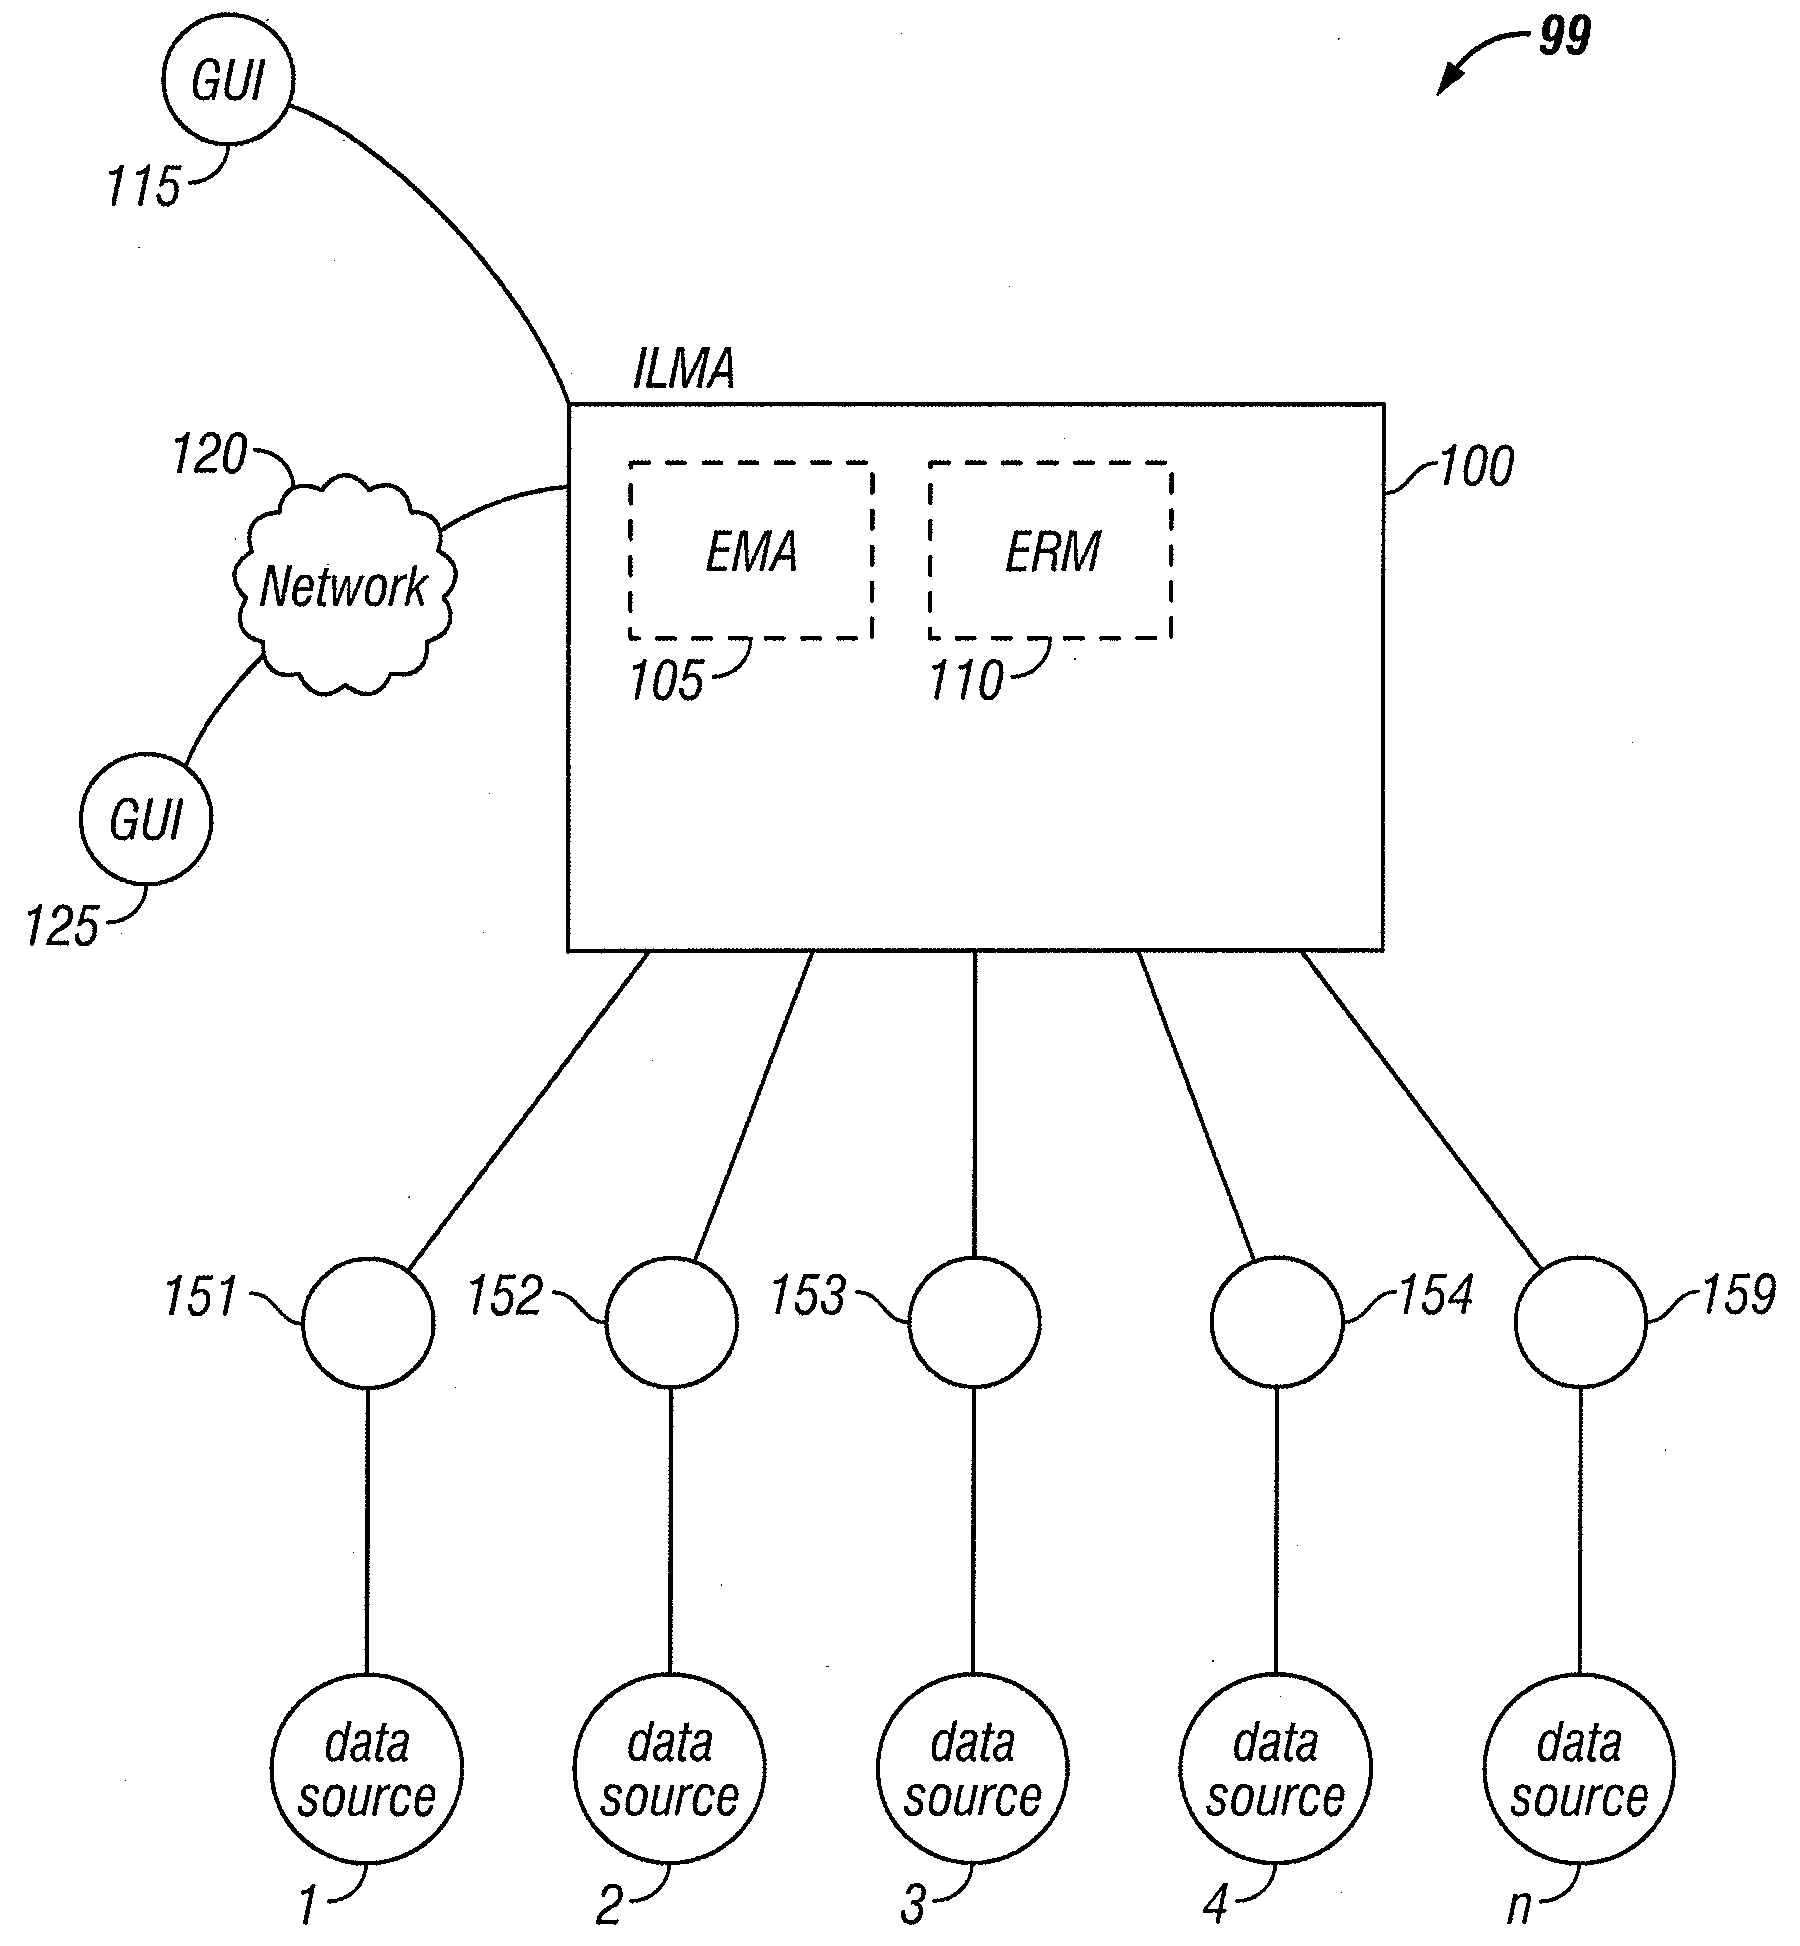 Method and Apparatus for Managing the Disposition of Data in Systems When Data is on Legal Hold